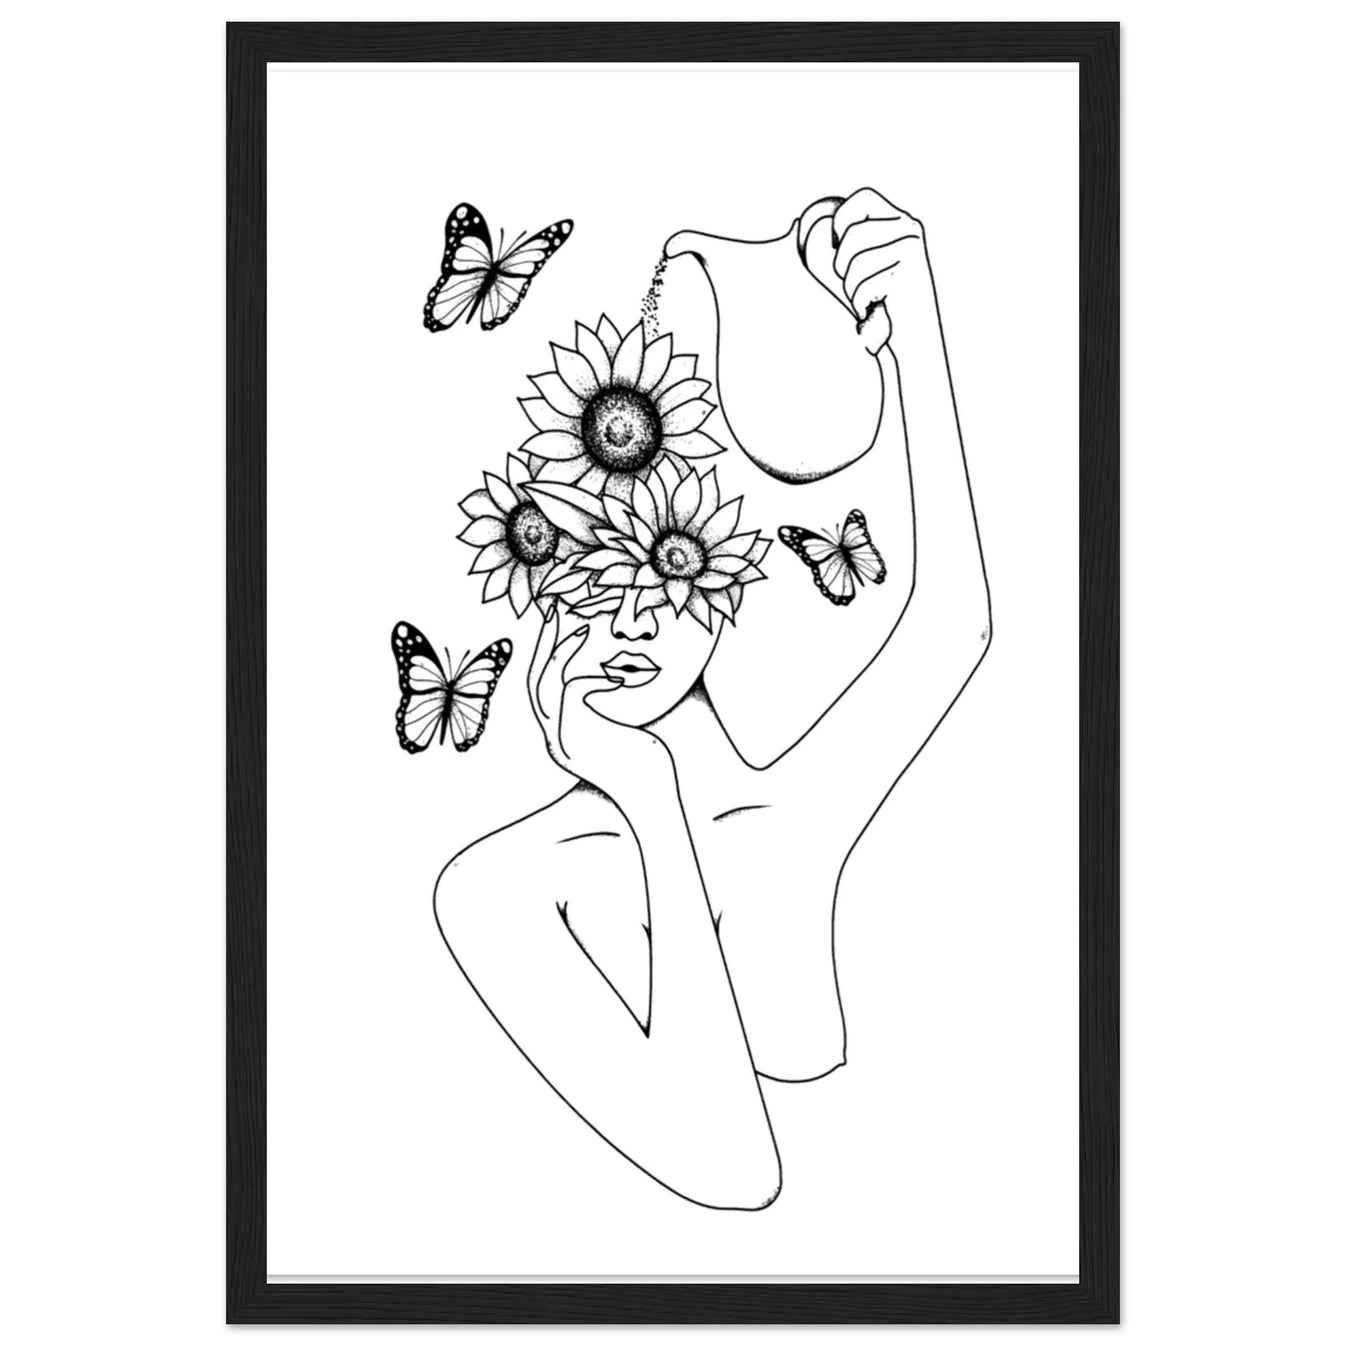 Zach Bryan Sun to Me Inspired Wooden Framed Graphic Print